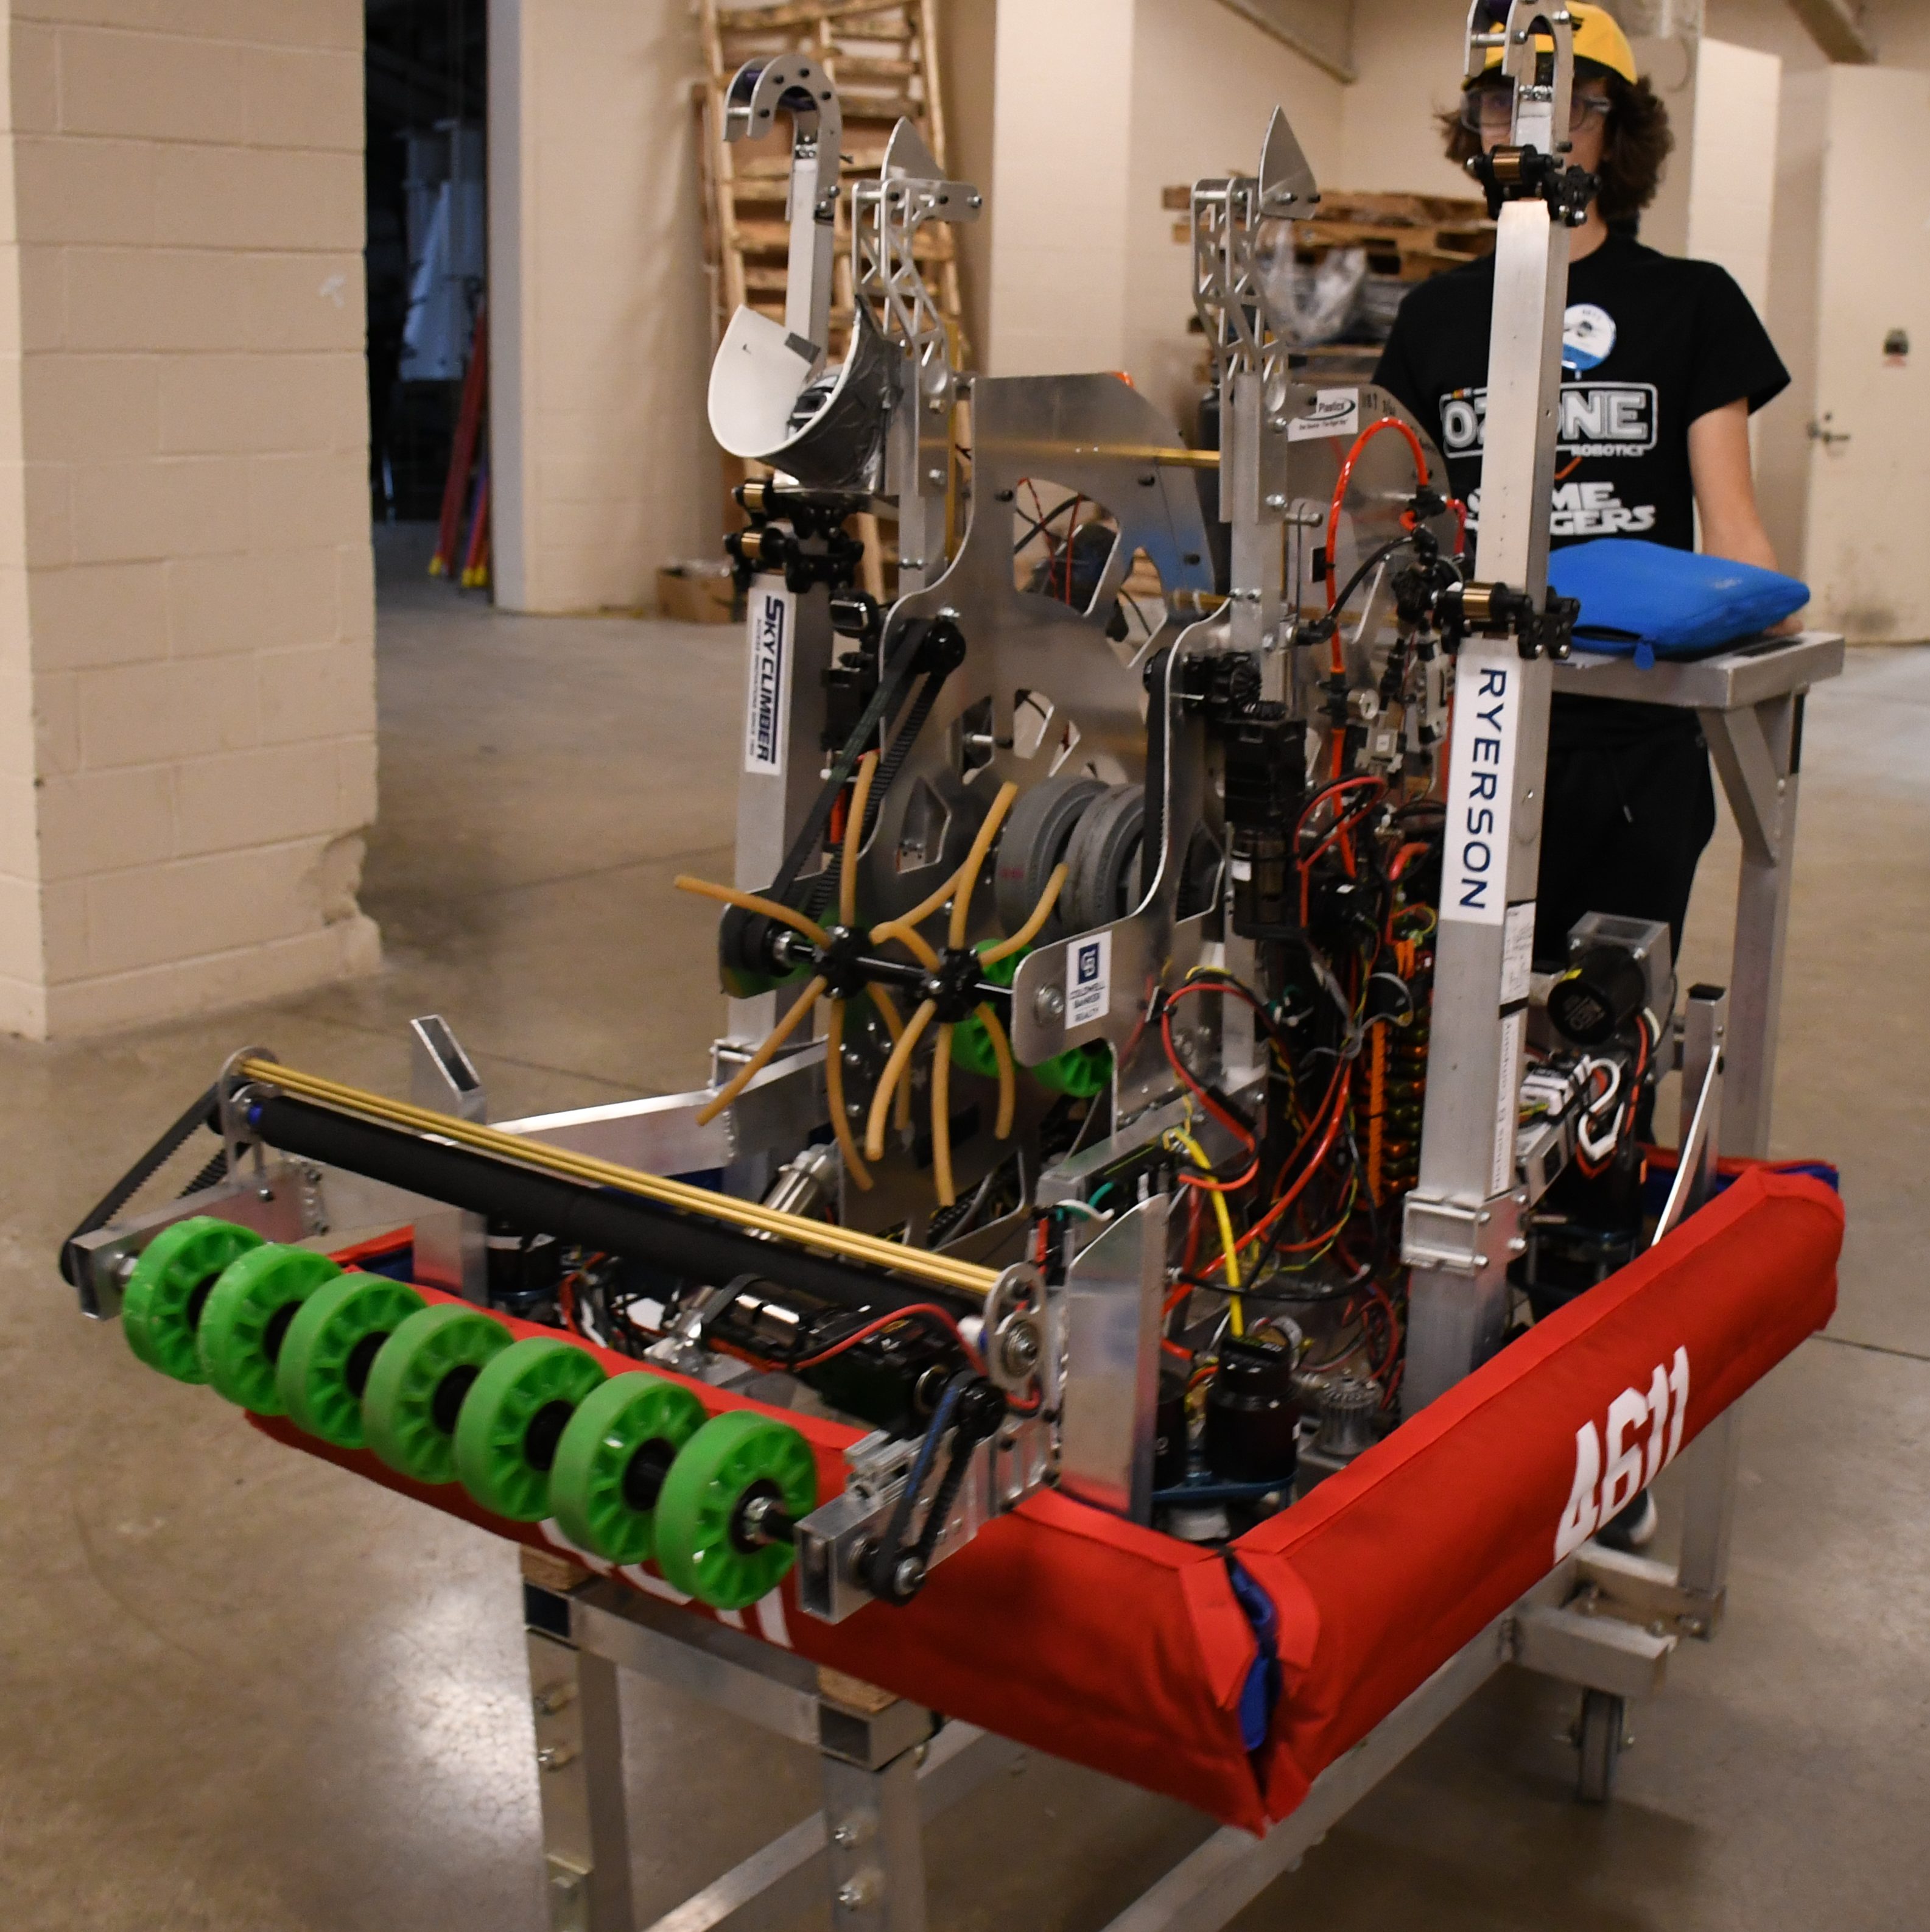 NOODLES is the latest addition to the OZONE Family. The Robot nears 120 ponds and features a complex climbing system allowing us to traverse money bar-like obstacles, helping us core in the 2022 RAPID REACT Competition. 